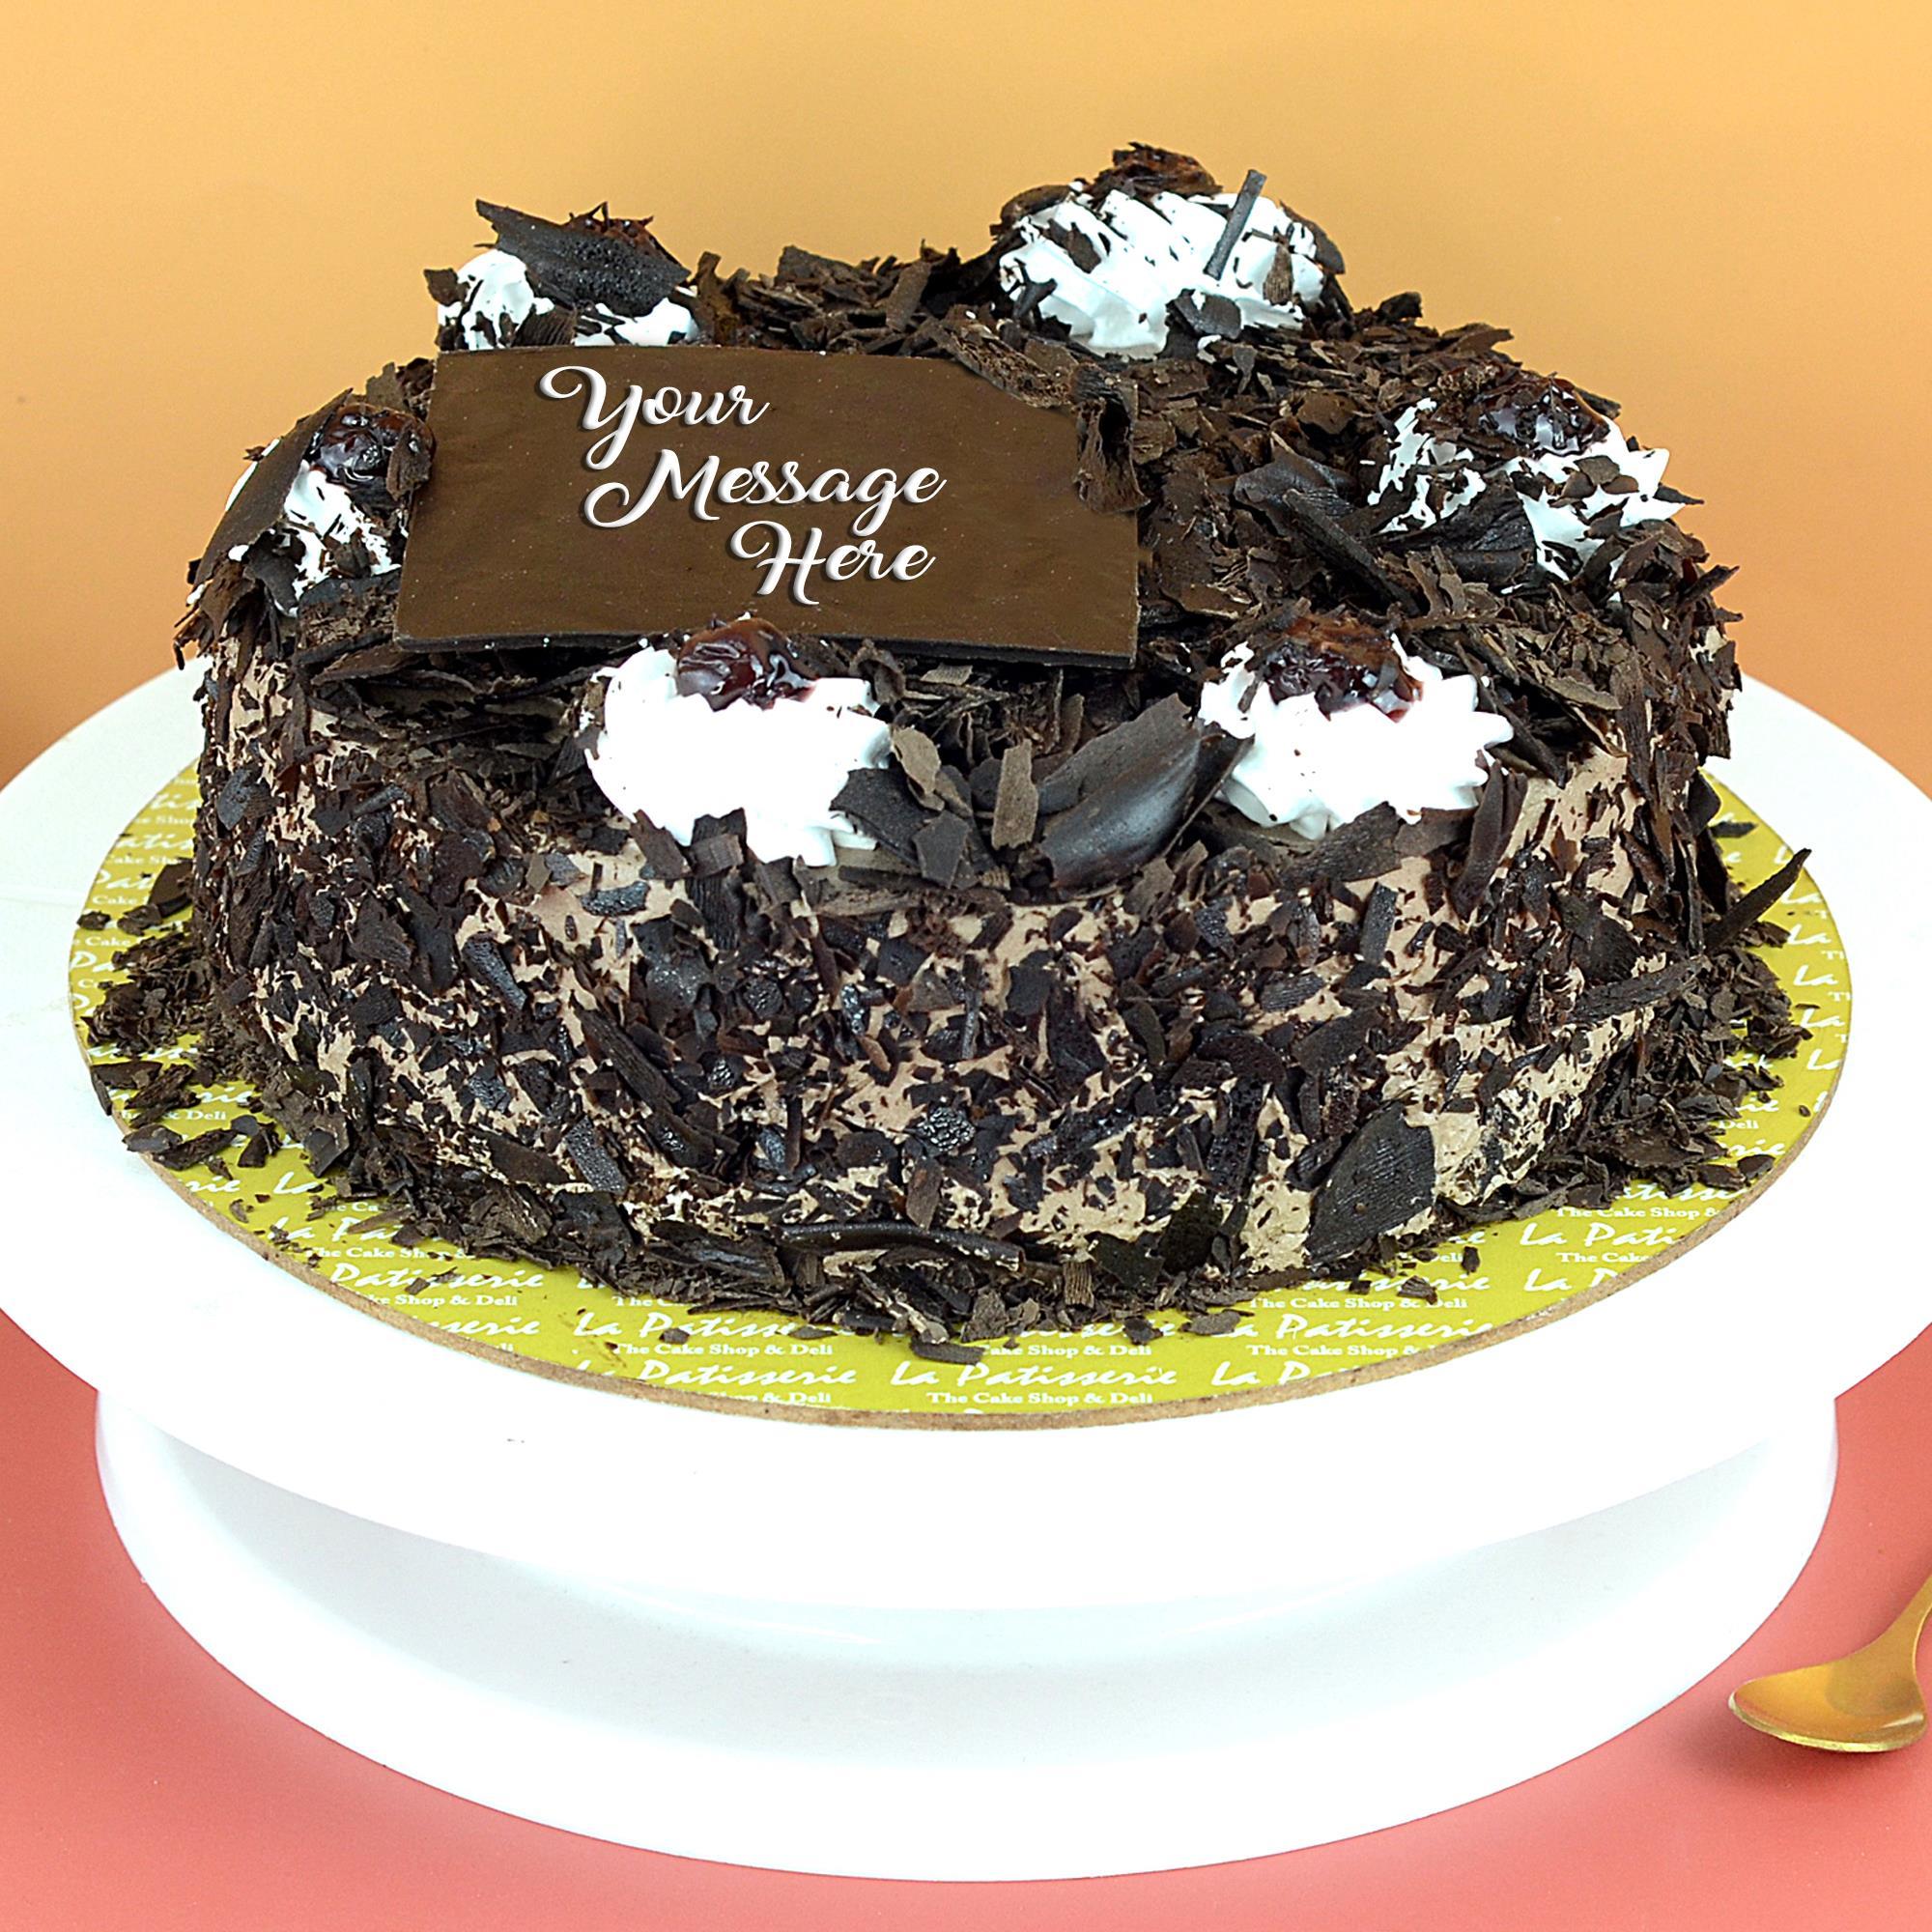 Shop For Cakes, Fresh Flowers & Gift Hampers Online In Mumbai.